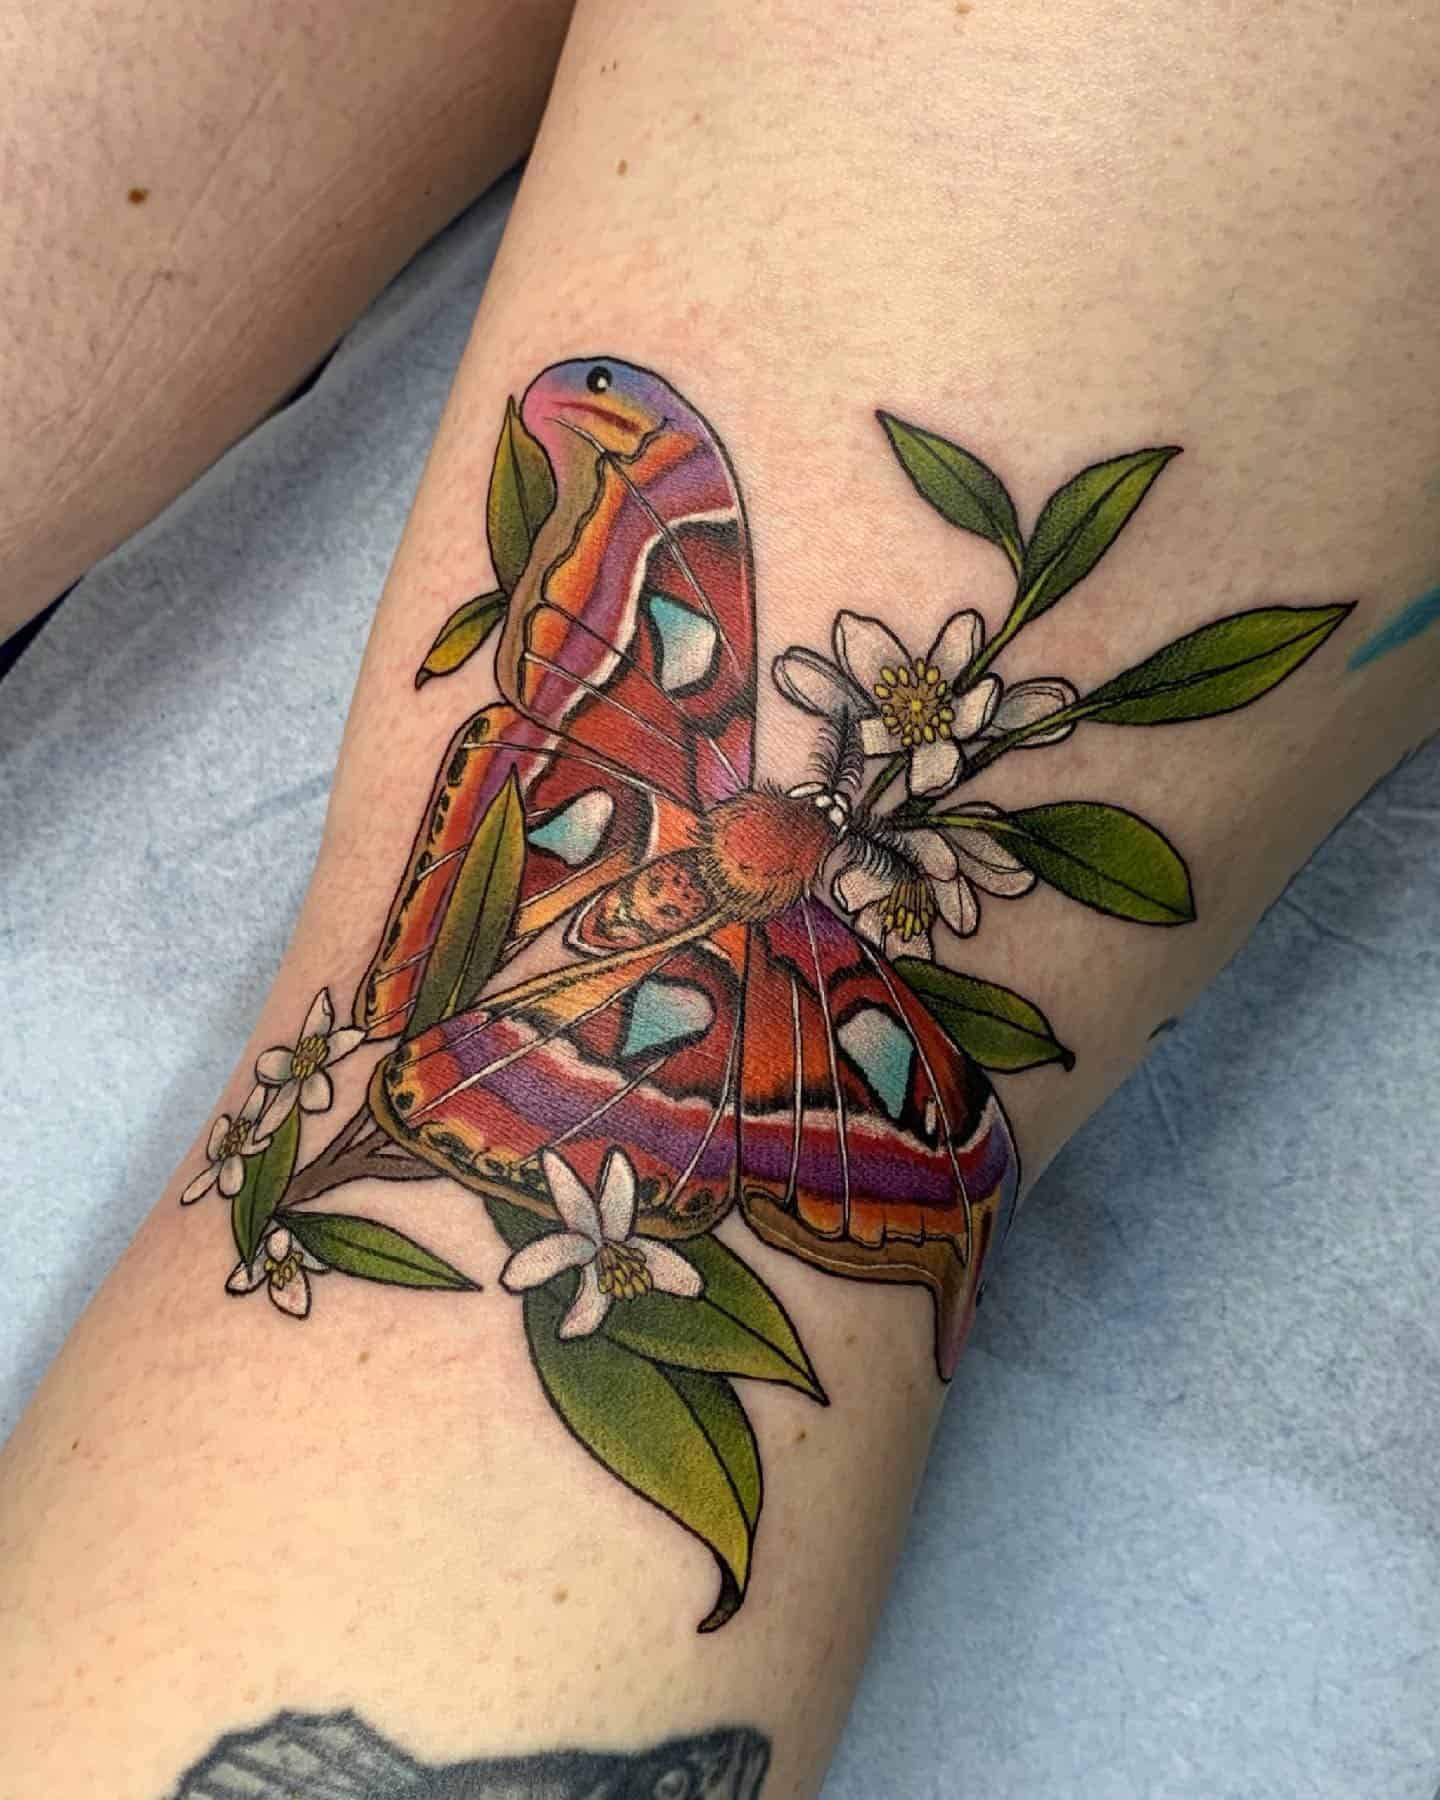 Butterfly Behind the Knee